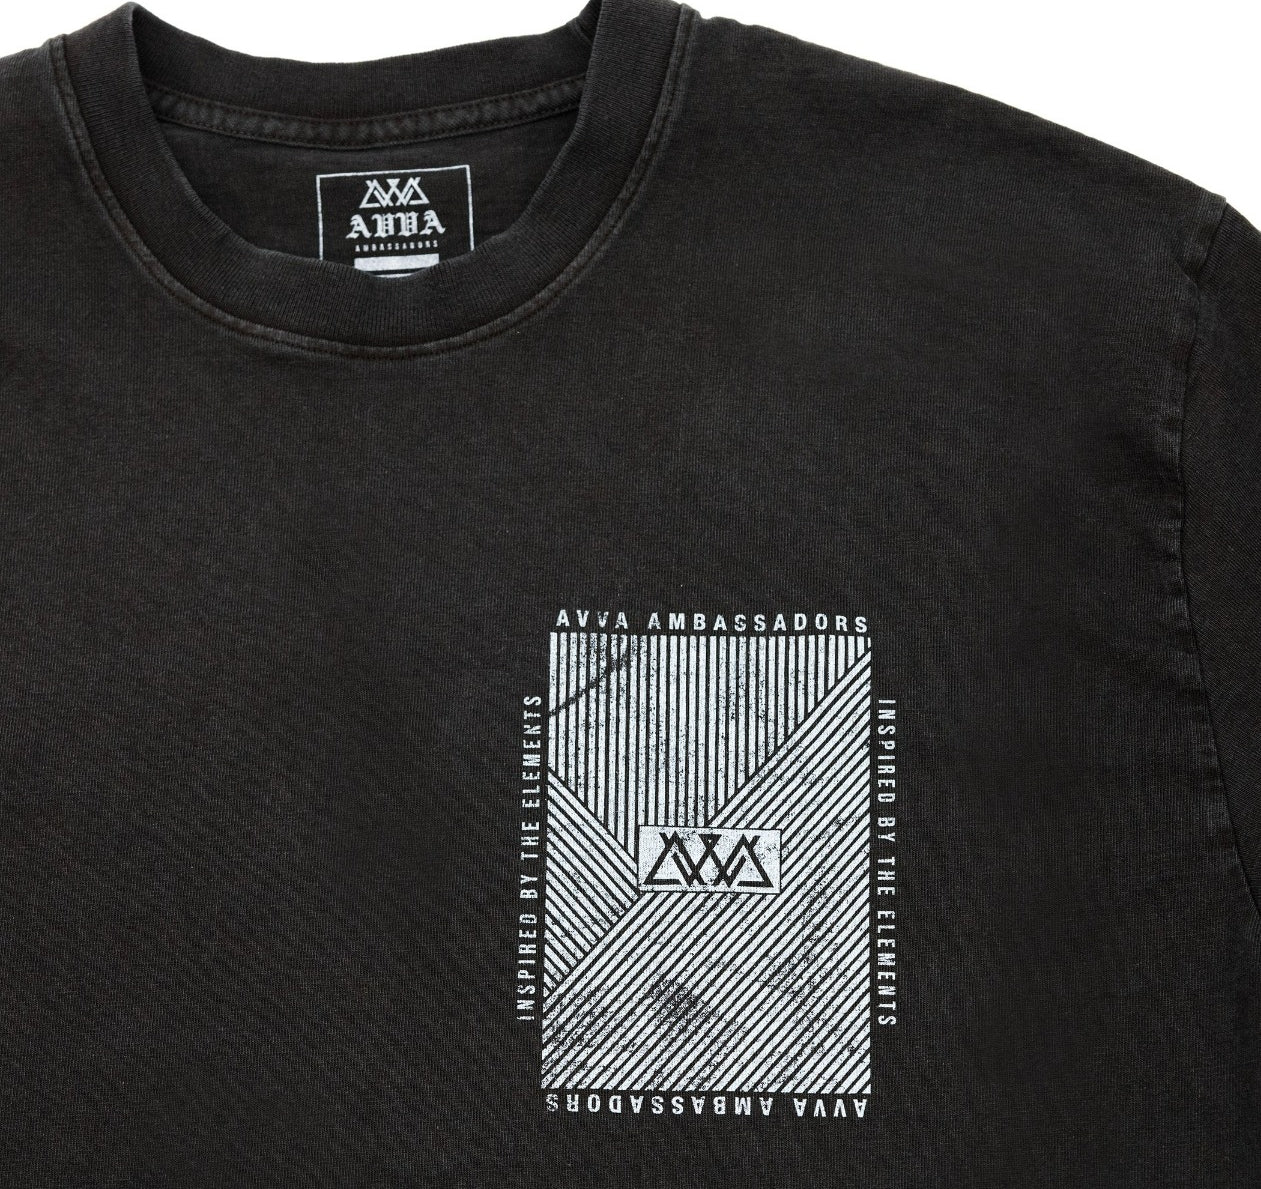 FRONT CLOSE UP VIEW OF HEAVYWEIGHT CLIMATE LONG SLEEVE. HIGHLIGHTING AVVA AMBASSADORS INSPIRED BY THE ELEMENTS LOGO IN TOP RIGHT.